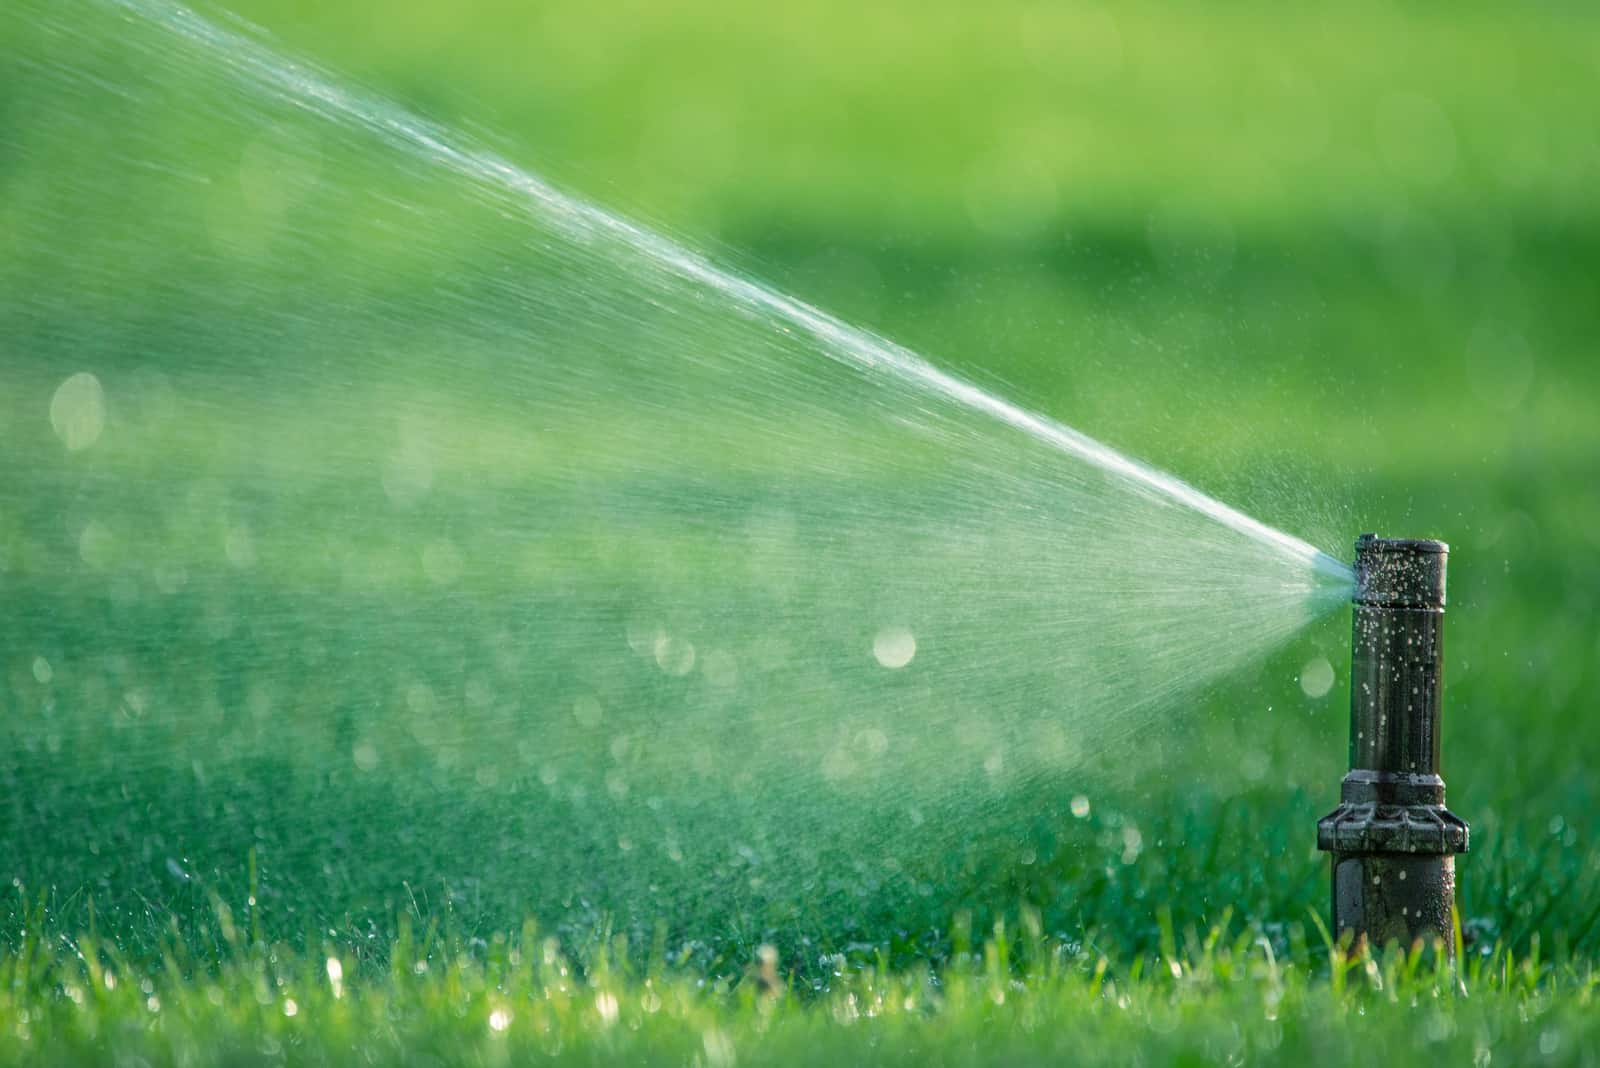 watering system waters the juicy young green lawn grass